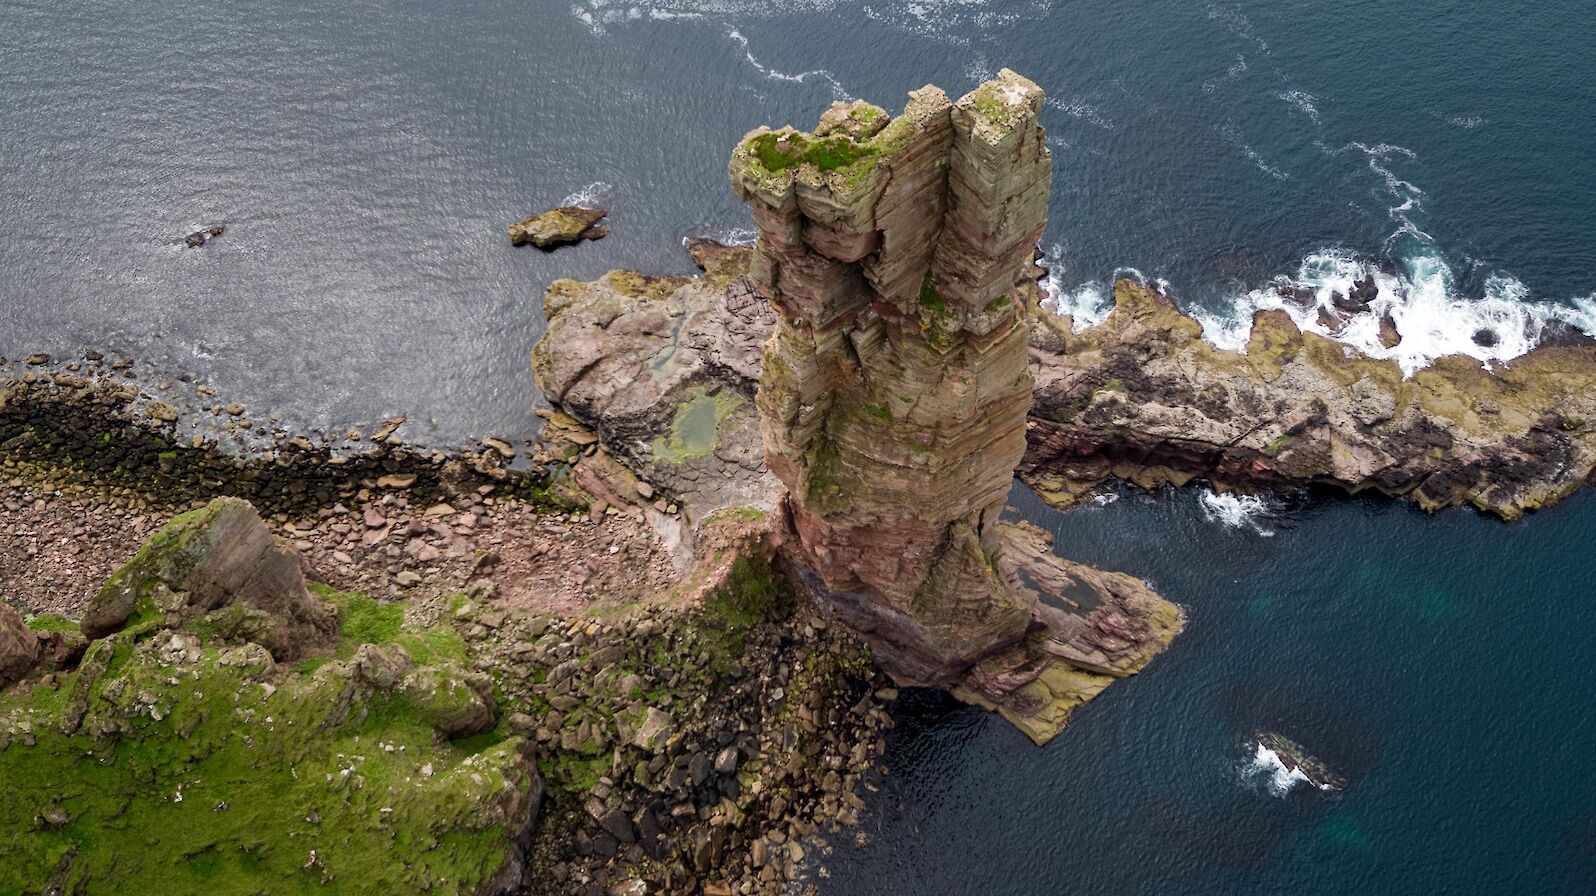 The Old Man of Hoy, Orkney - image by Nick McCaffrey